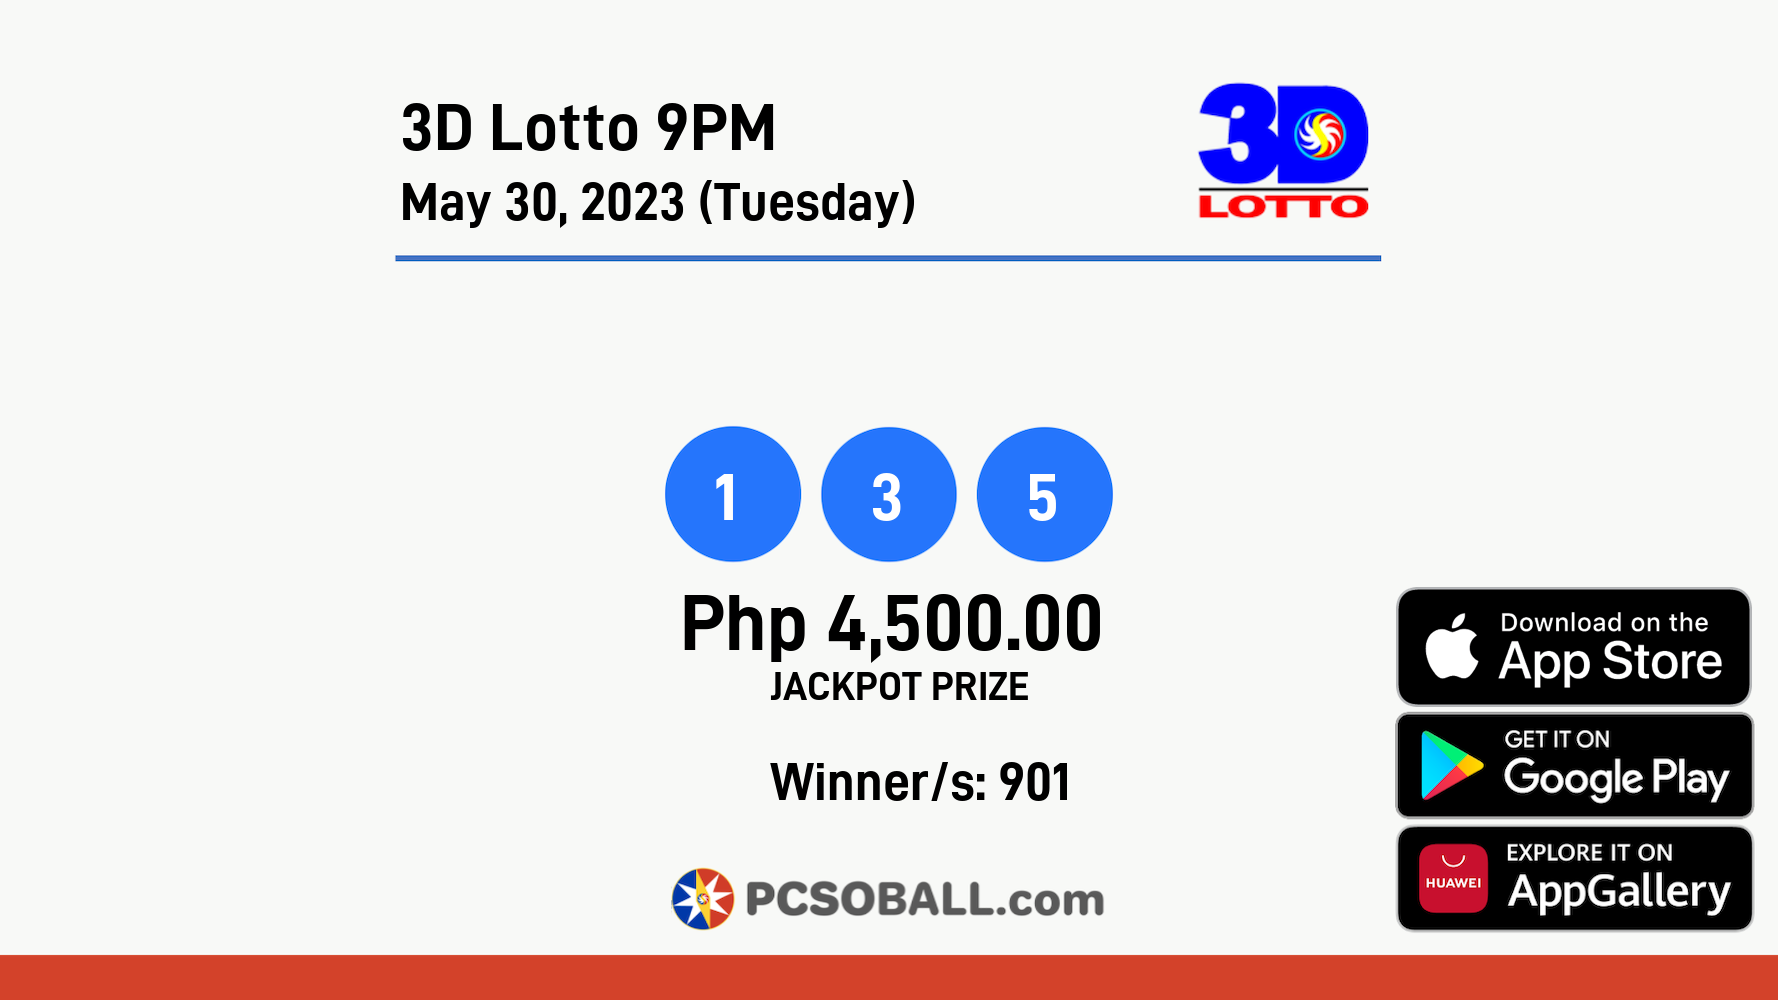 3D Lotto 9PM May 30, 2023 (Tuesday) Result